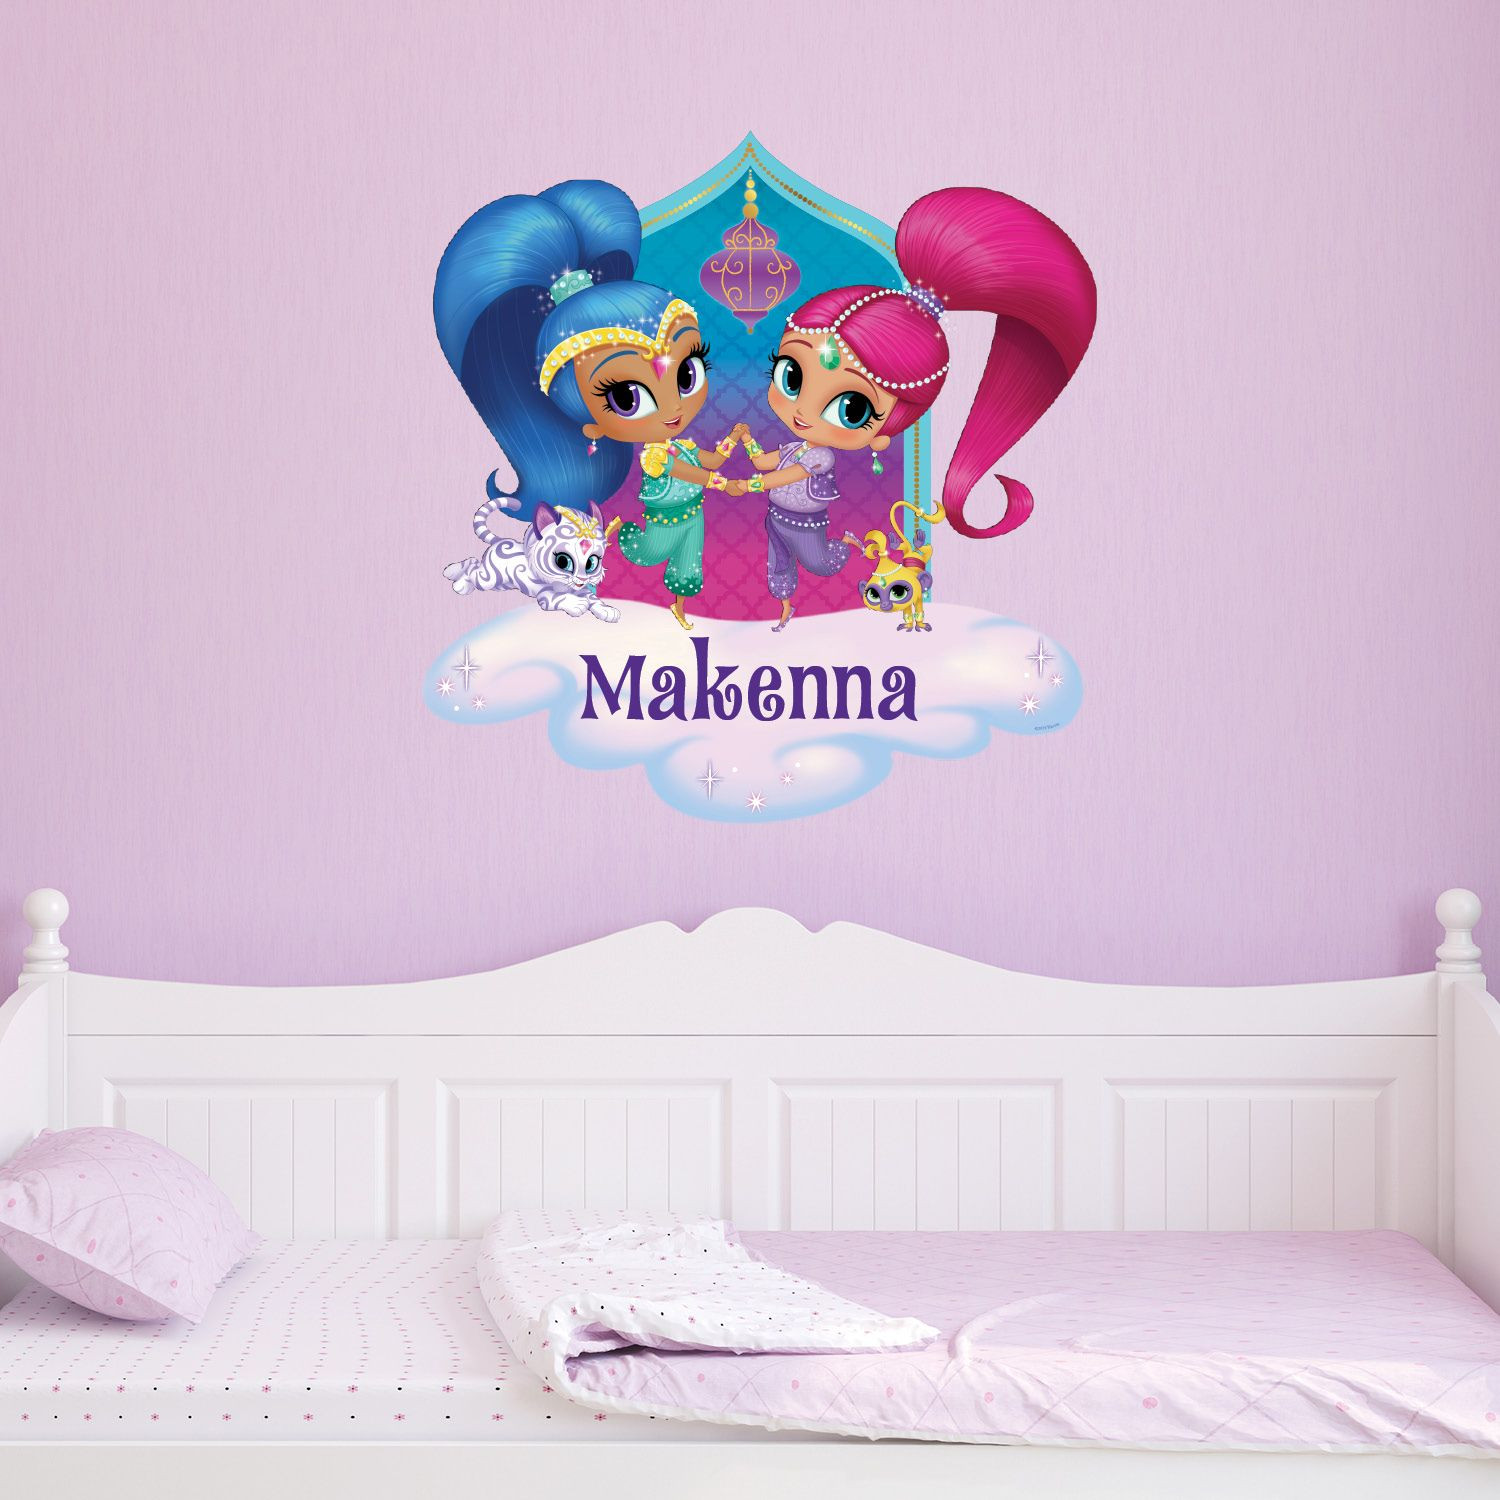 Shimmer And Shine Bedroom Decor
 Shimmer and Shine Room Decal Tv s Toy Box